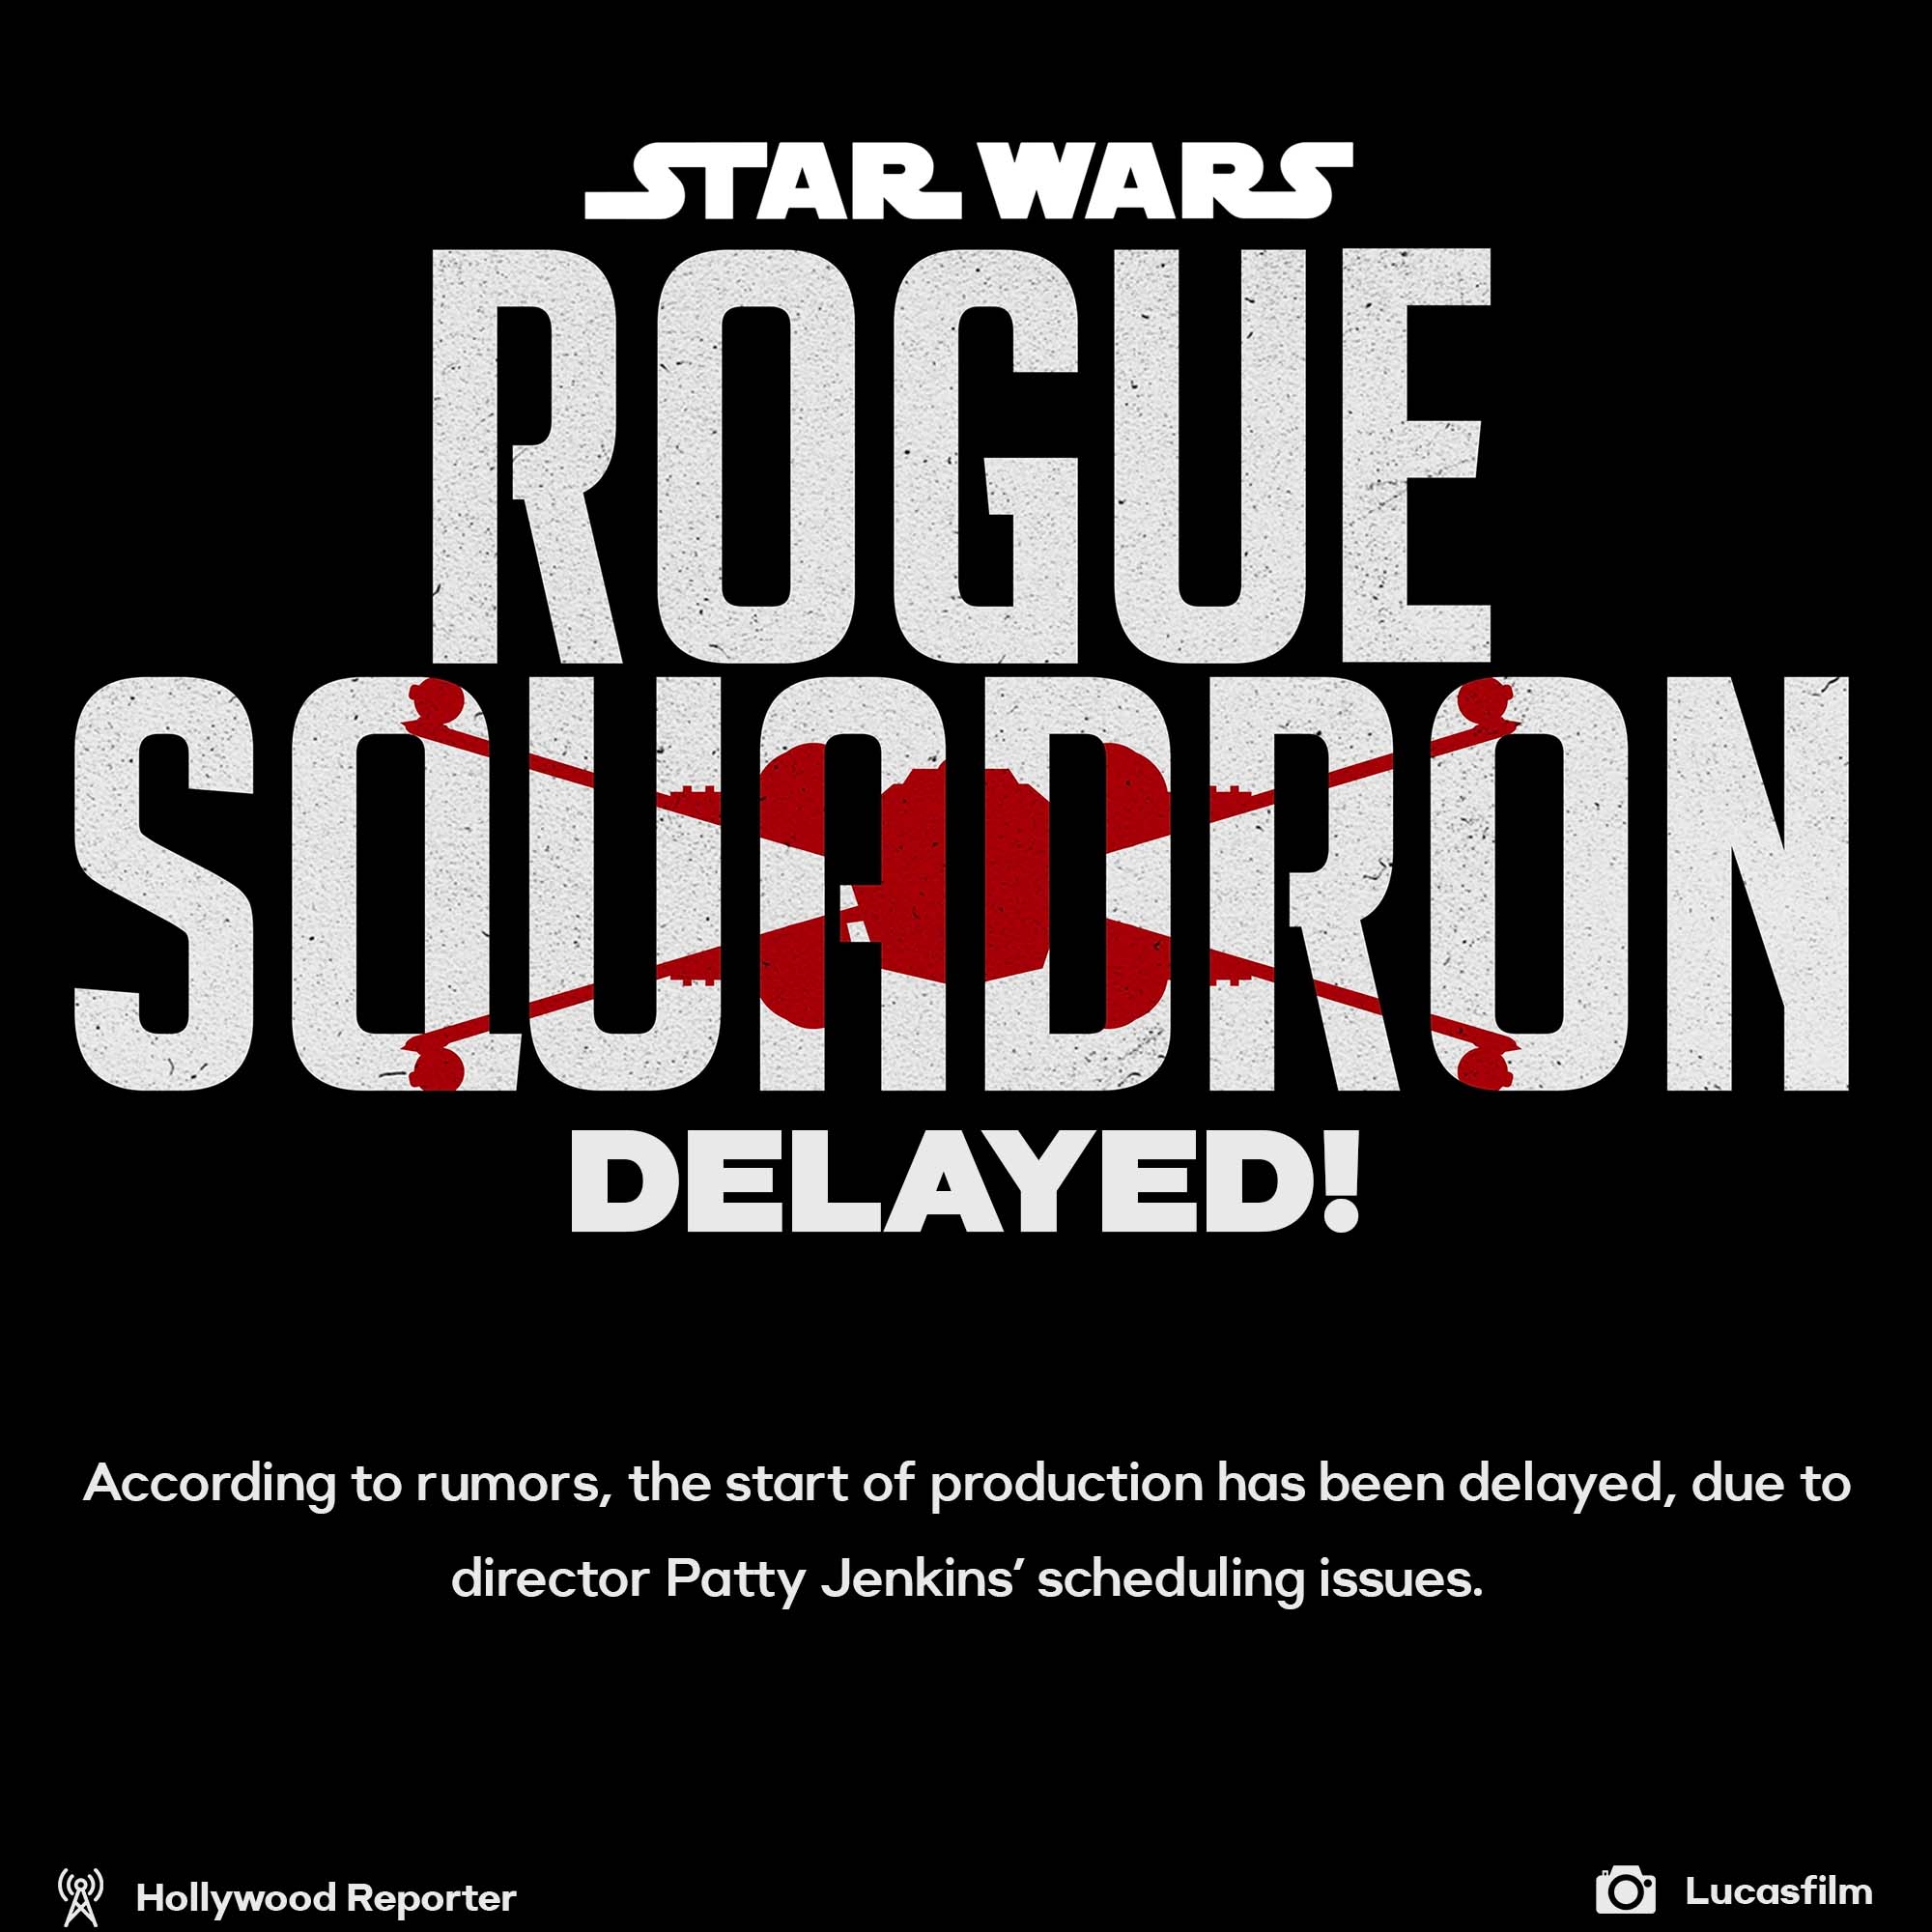 Star Wars Rogue Squadron movie is delyed due to scheduling isseus